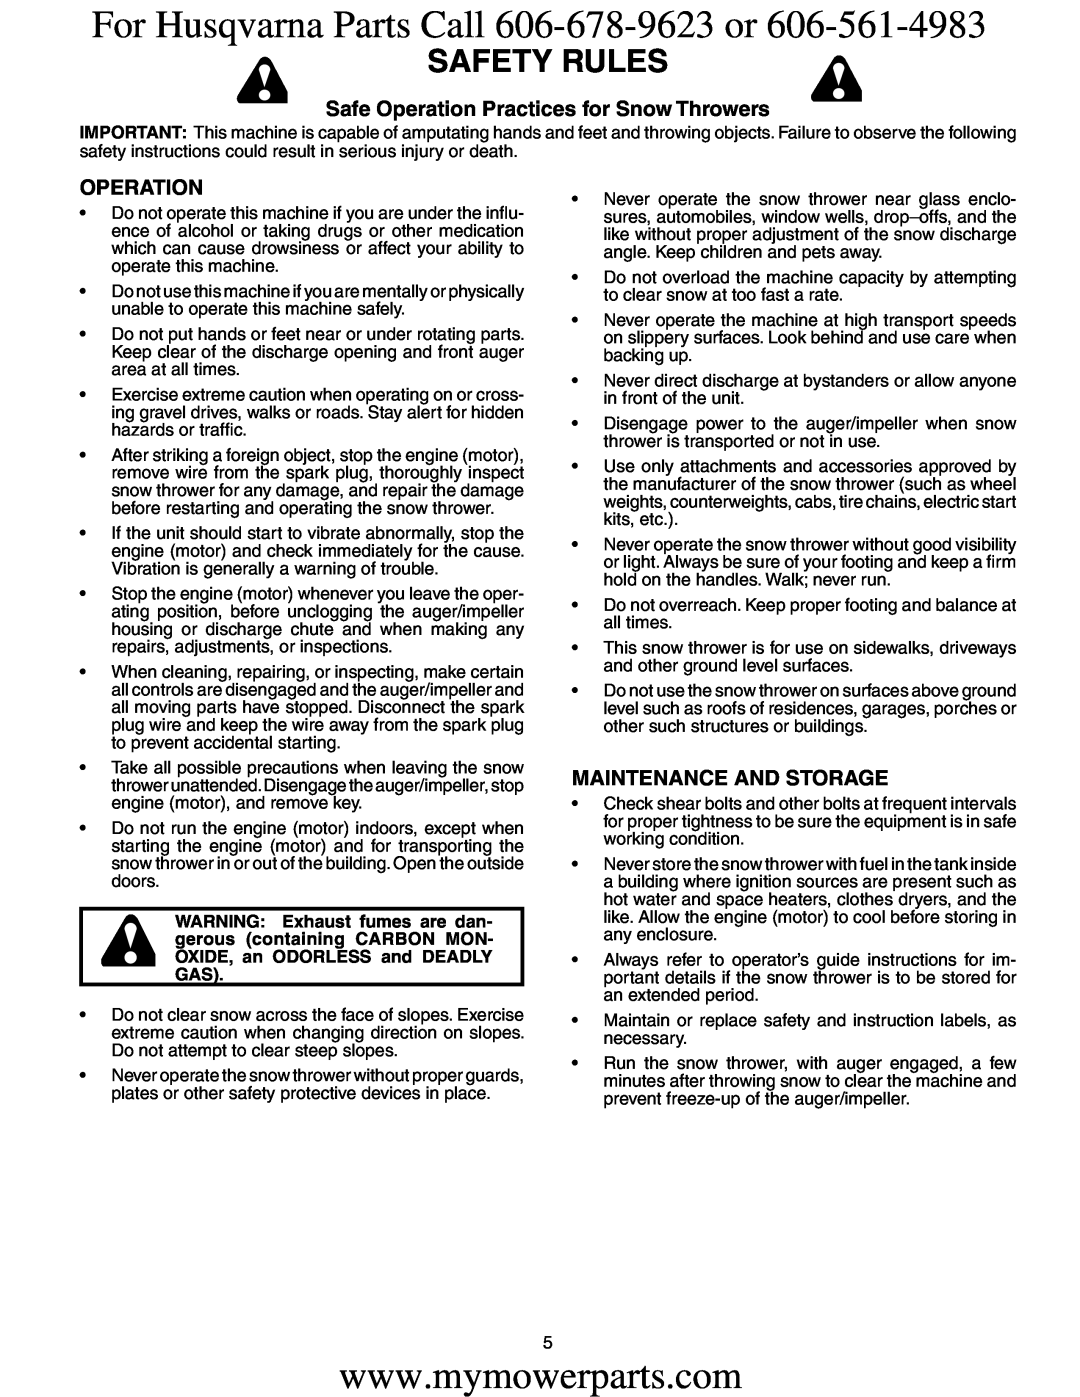 Electrolux OHV Safety Rules, For Husqvarna Parts Call 606-678-9623 or, Safe Operation Practices for Snow Throwers 